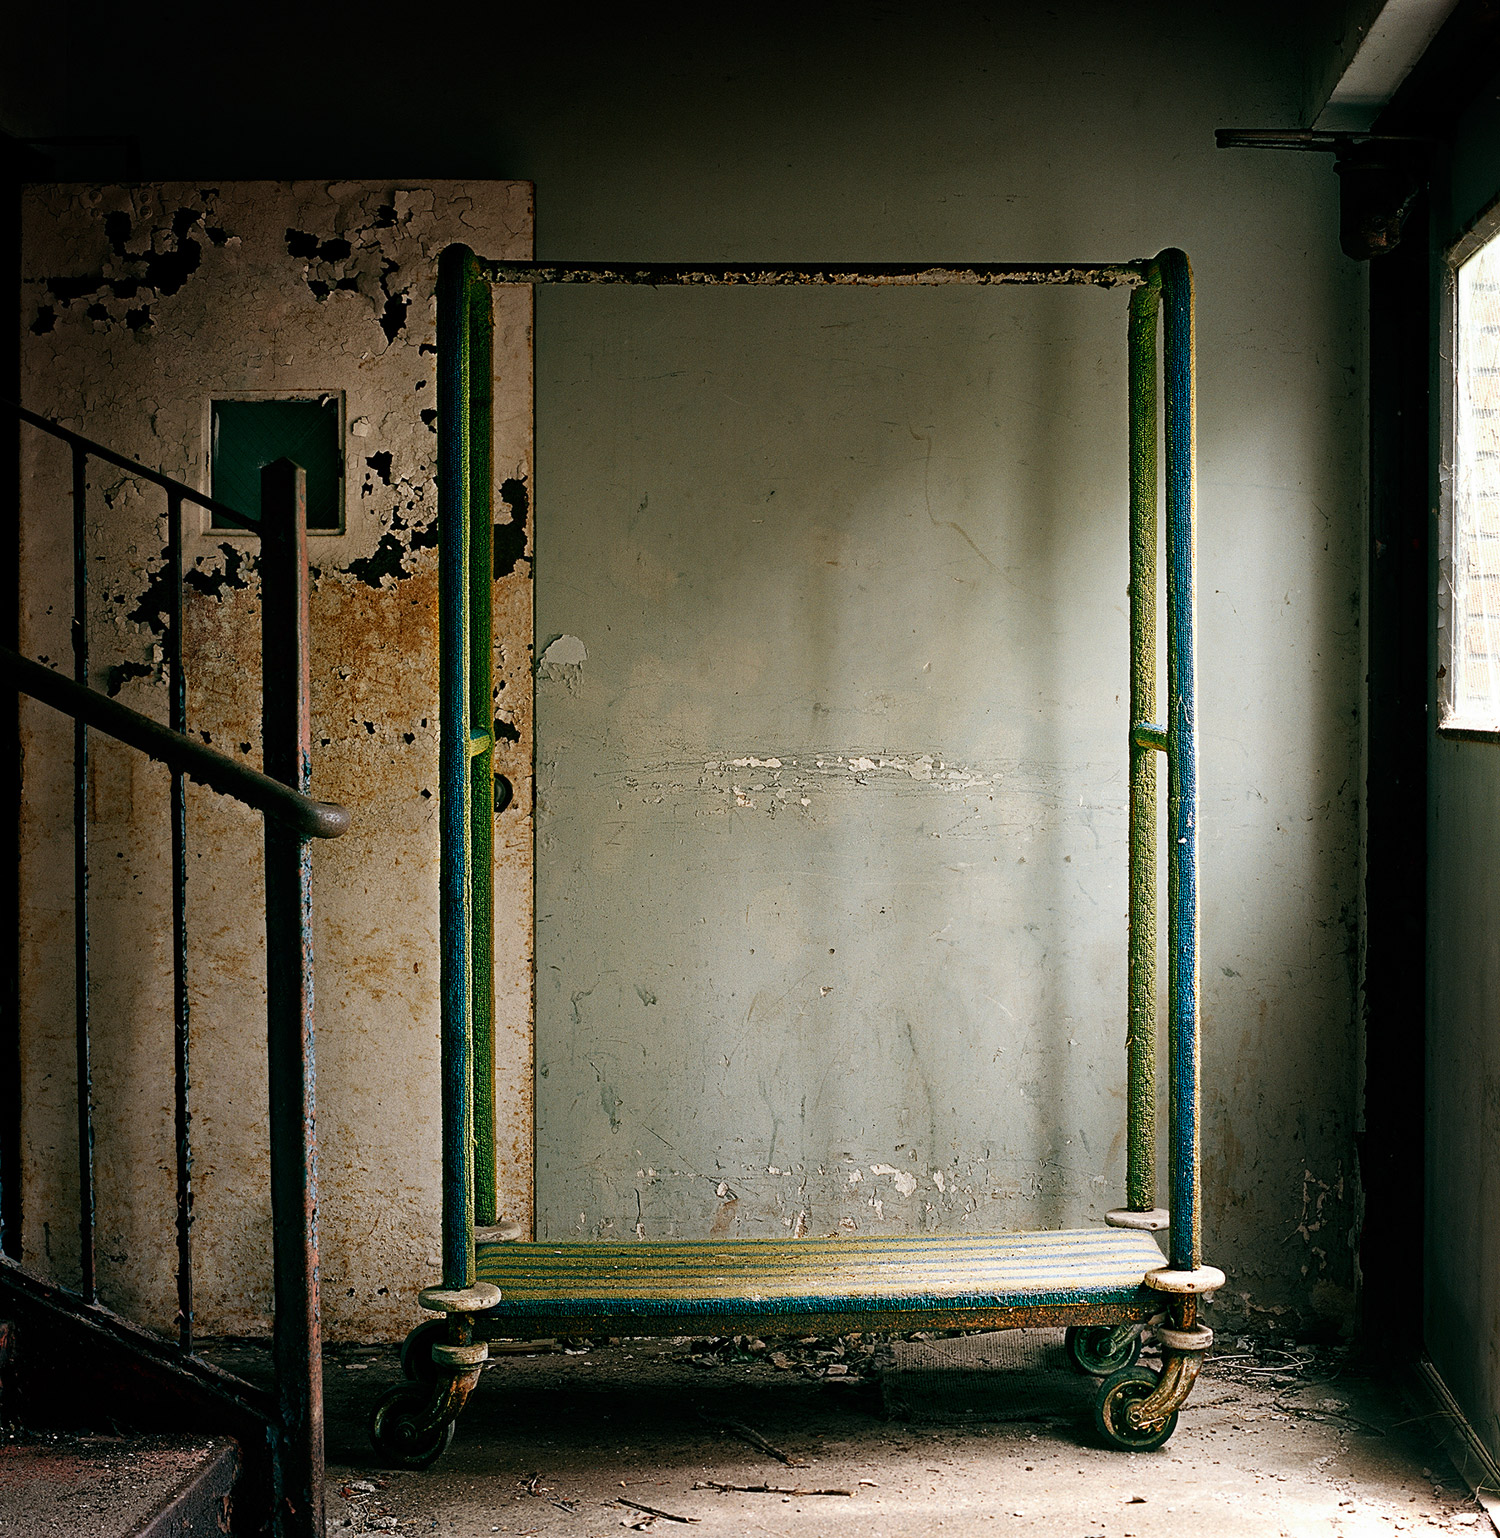 A luggage cart remains, Pines Hotel, 2010